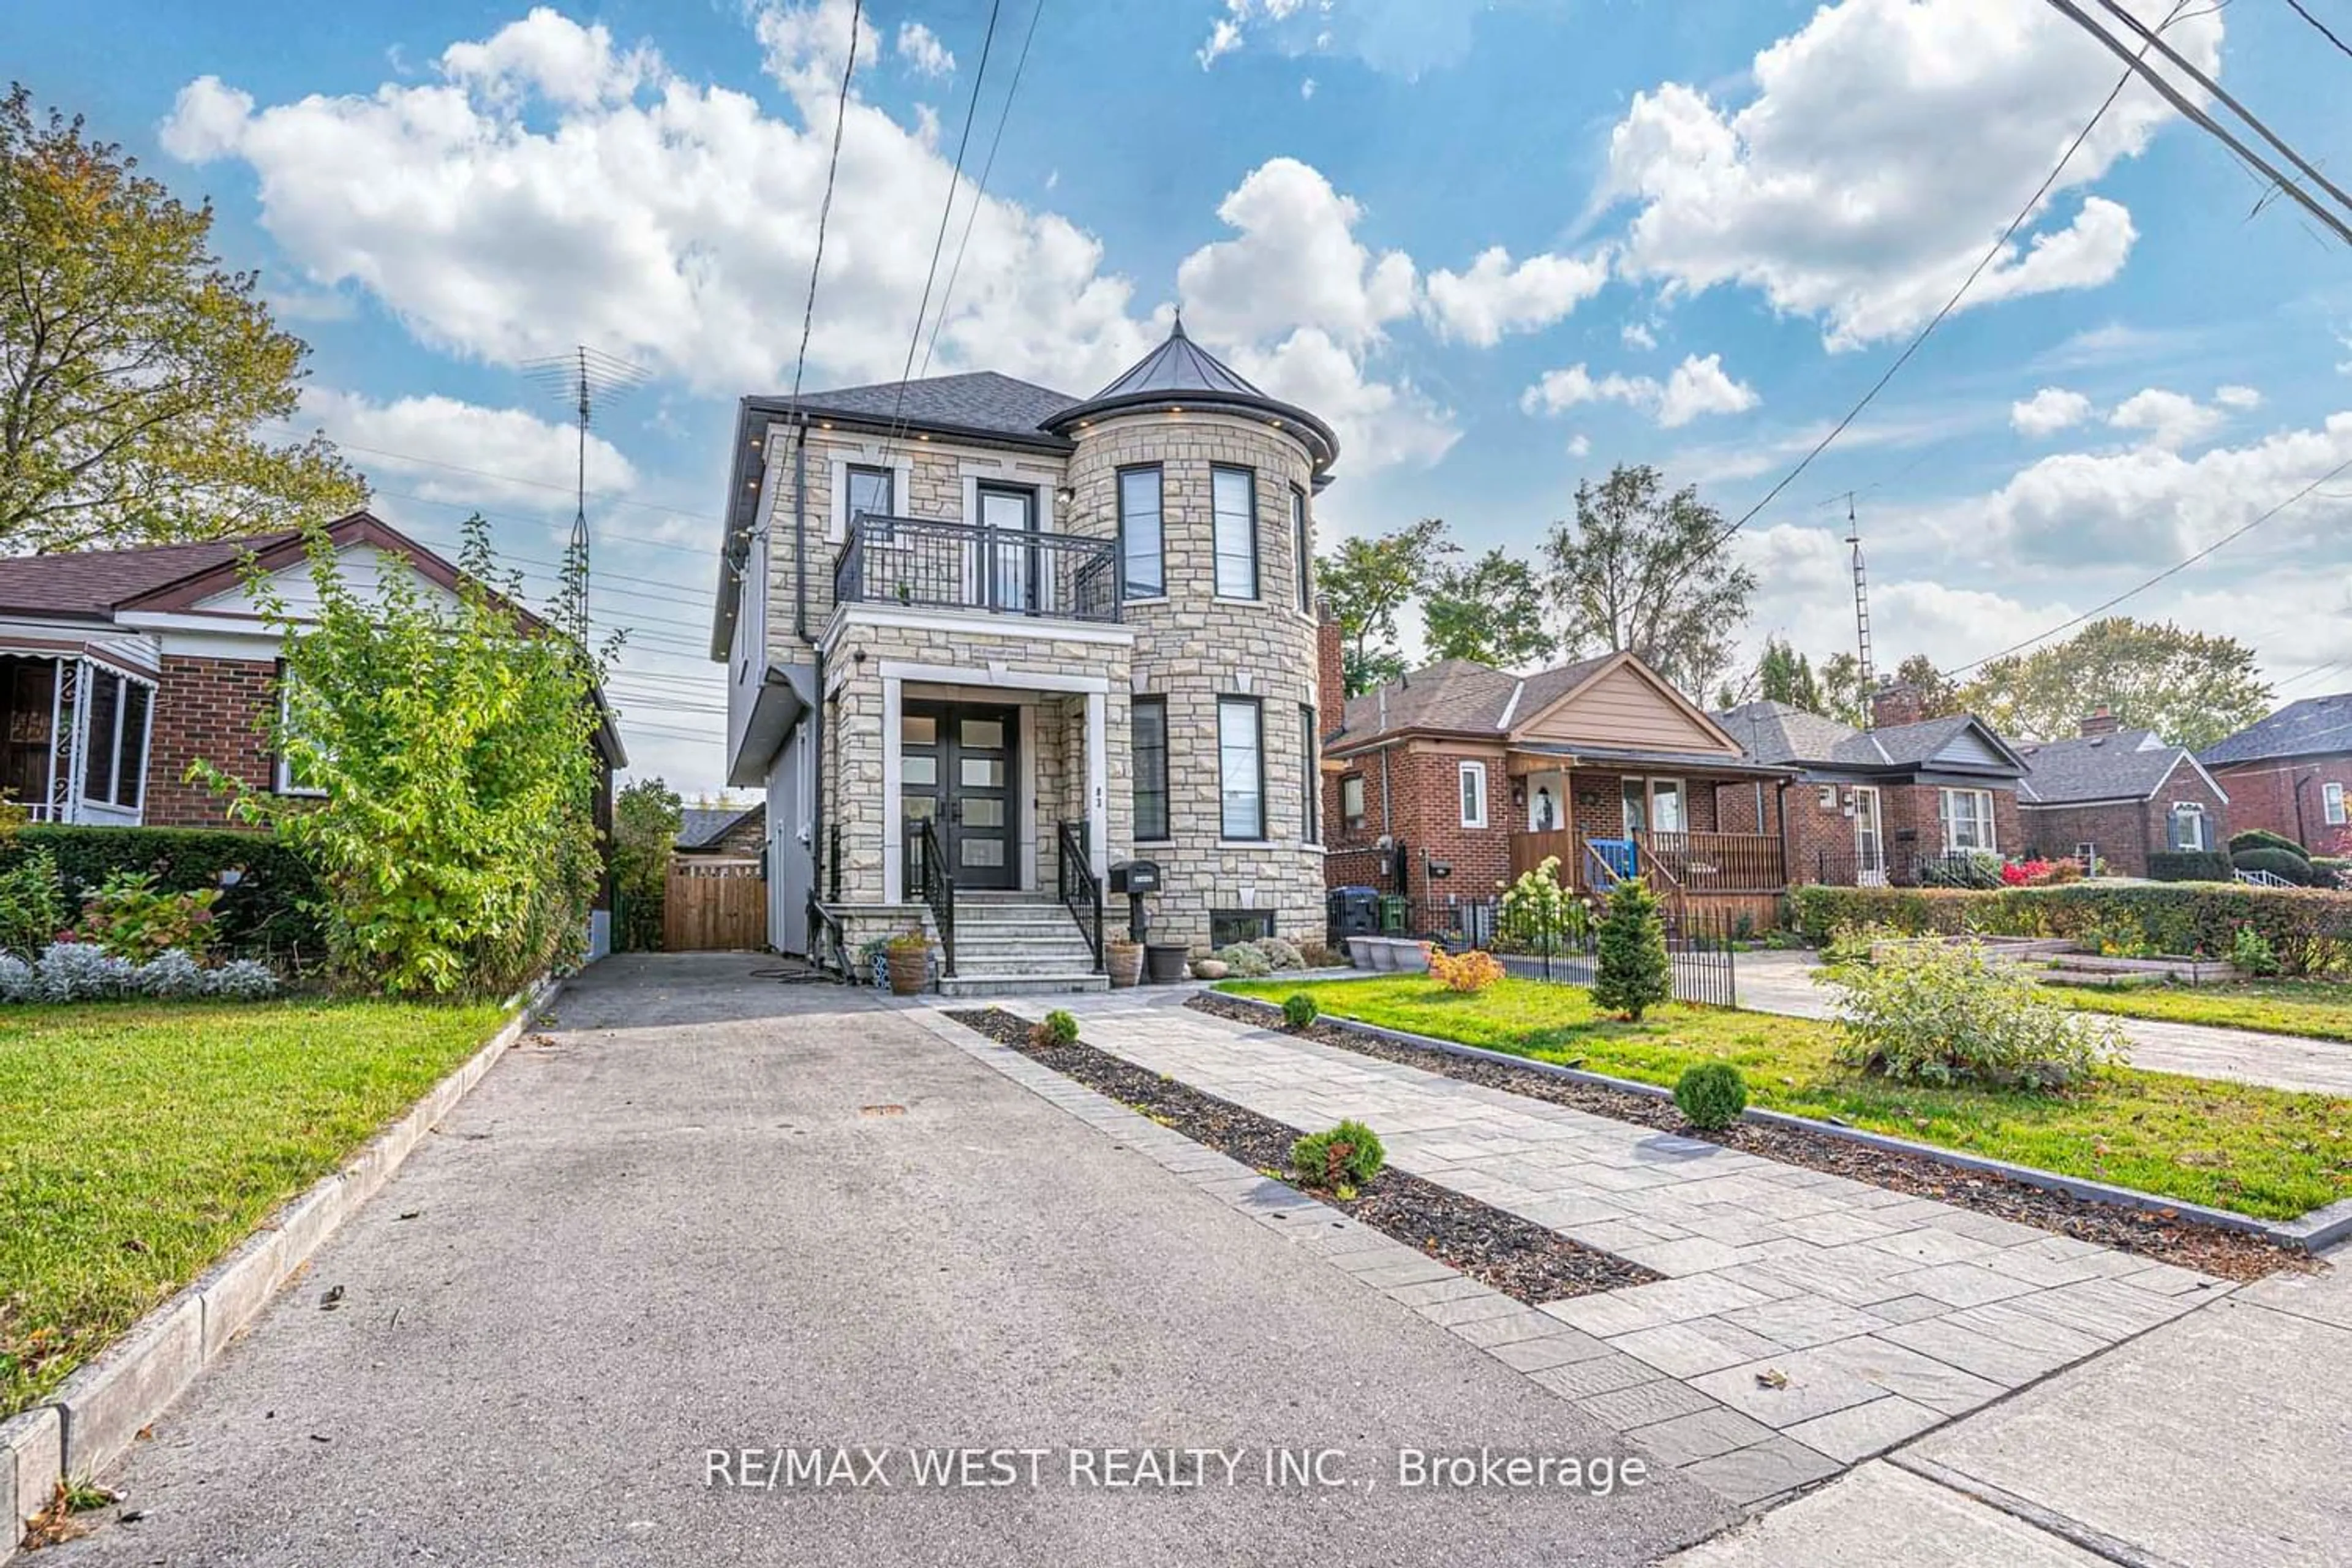 Frontside or backside of a home for 83 Foxwell St, Toronto Ontario M6N 1Y9